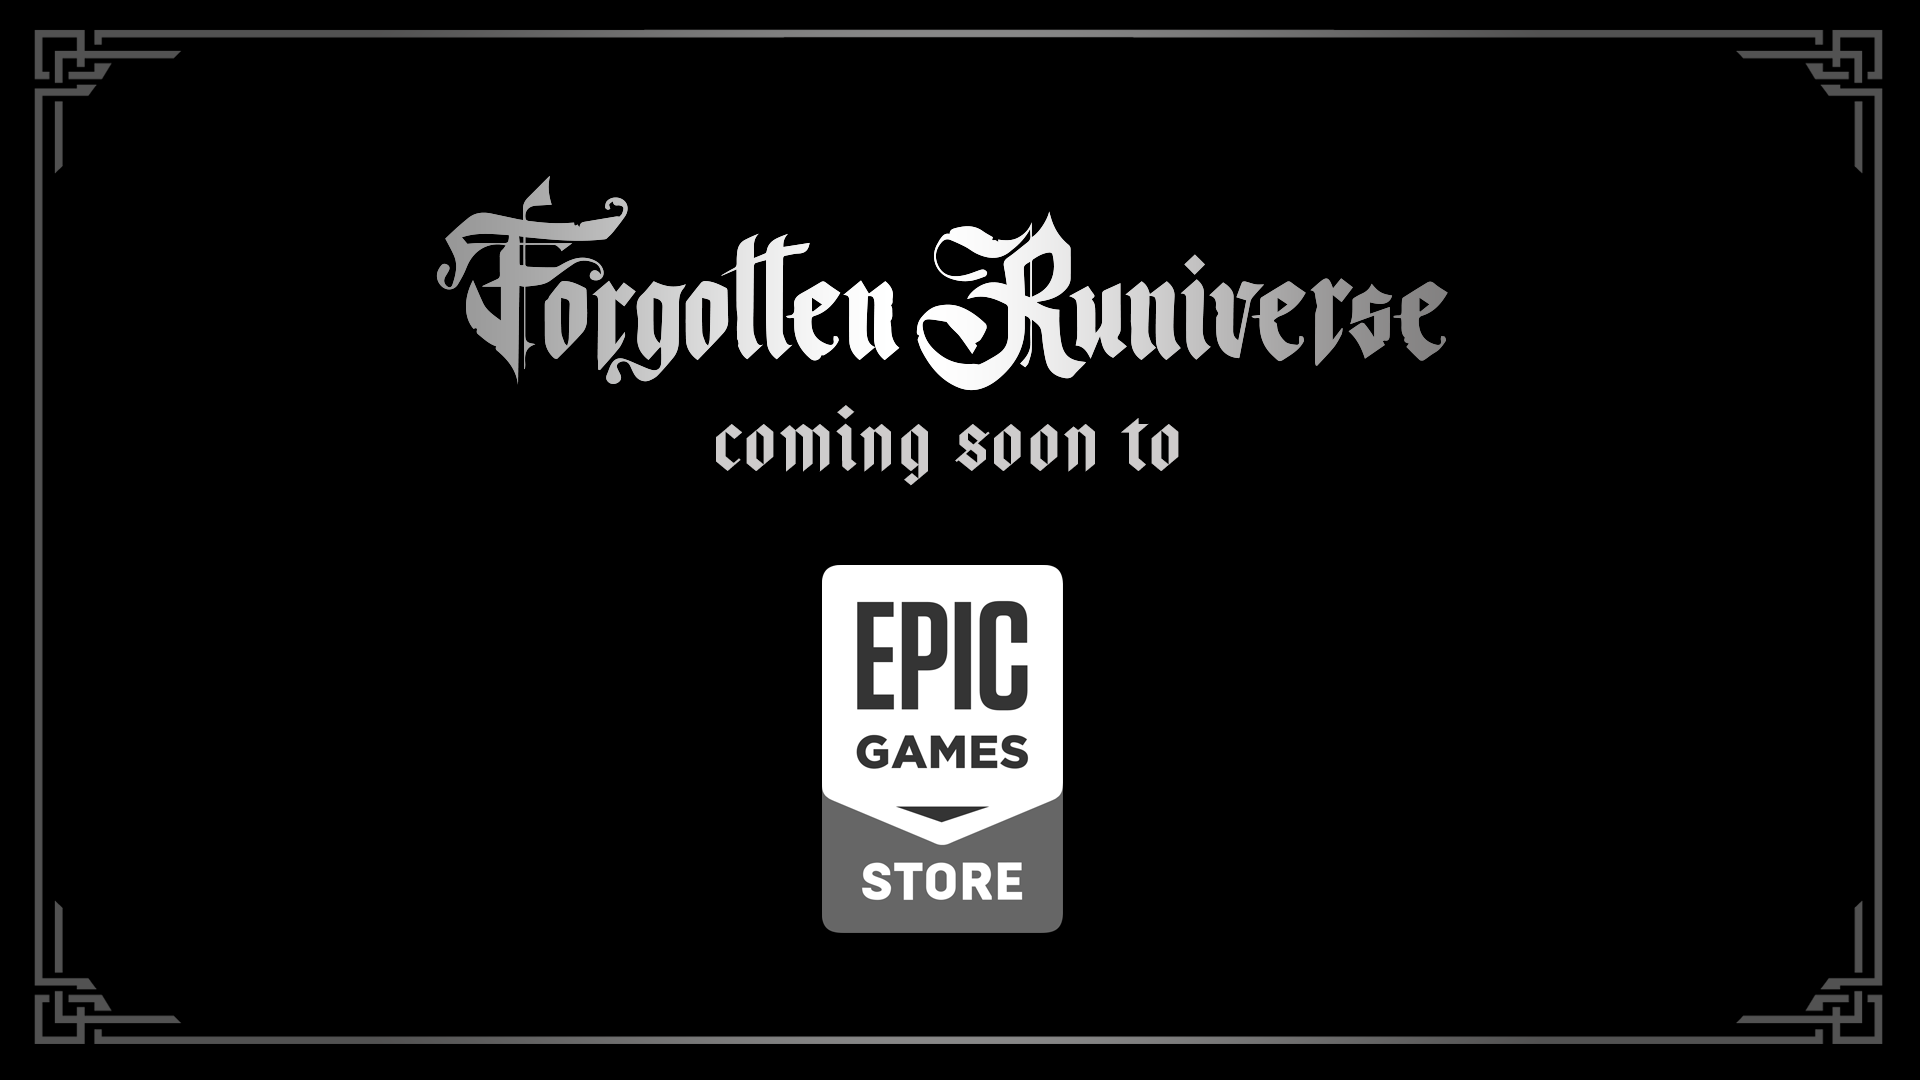 Forgotten Runiverse coming soon to the Epic Games Store